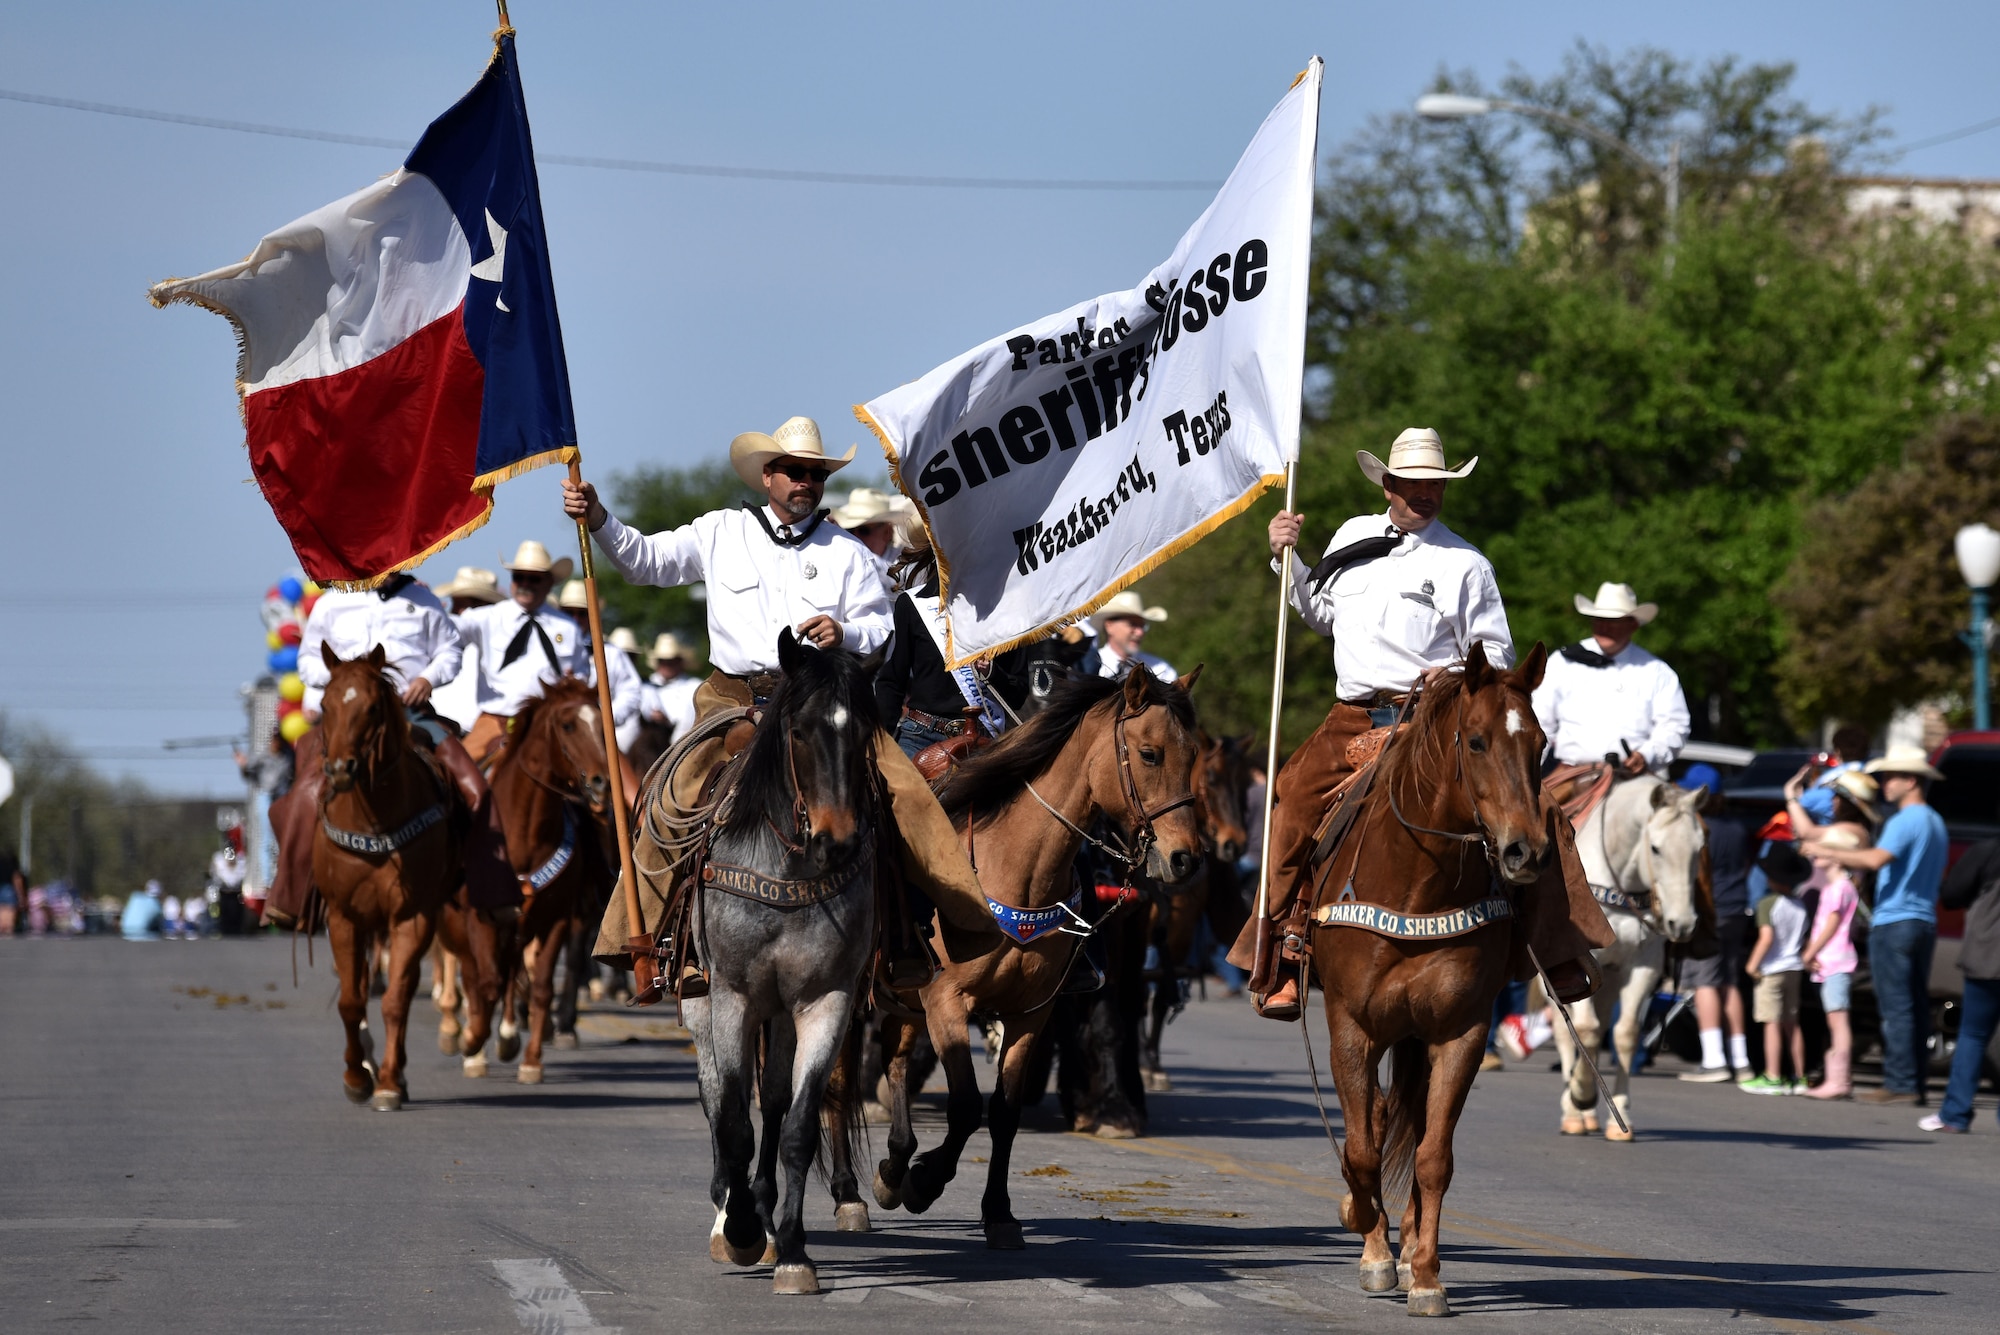 The Parker County Sheriff’s Posse rides during the 89th Annual San Angelo Rodeo parade through downtown San Angelo April 10, 2021. The posse has ridden in many parades and won multiple awards over the years. (U.S. Air Force photo by Staff Sgt. Seraiah Wolf)